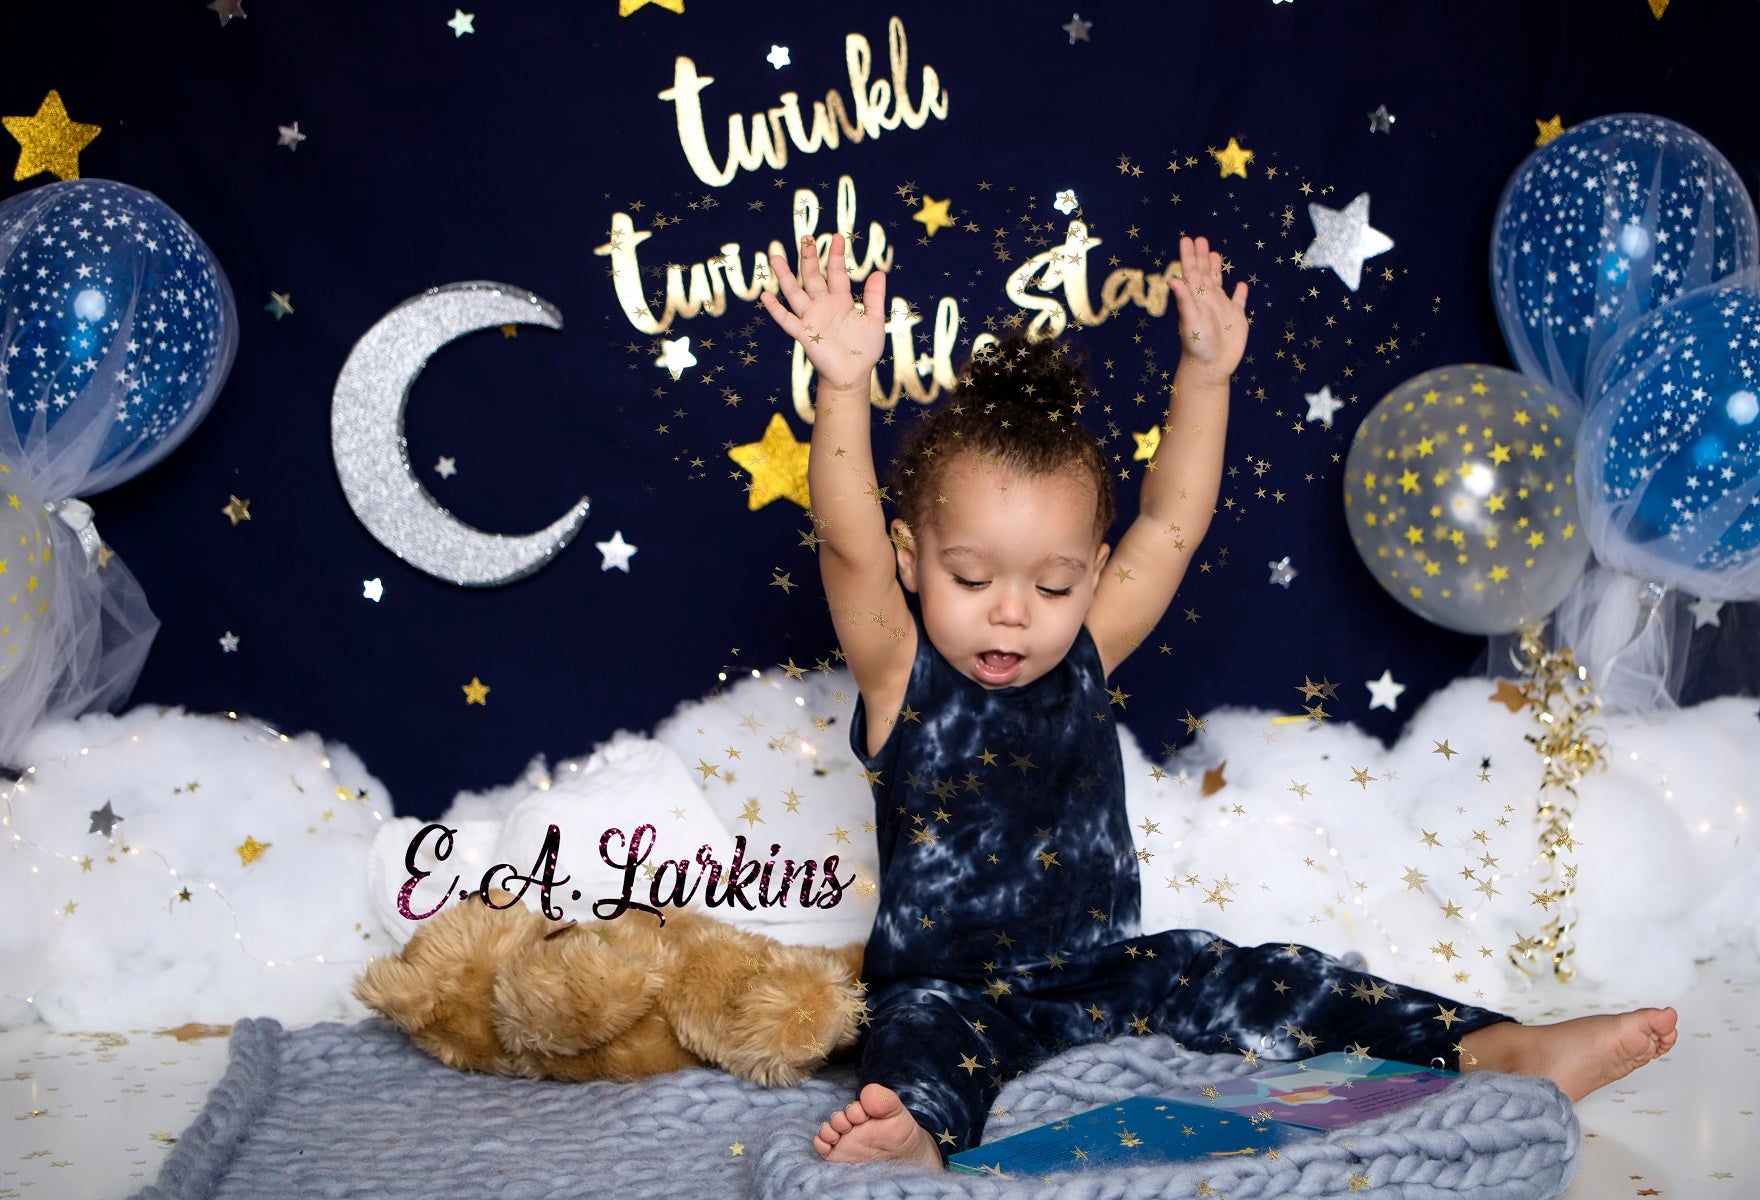 Kate  Twinkle Stars with Balloons Backdrop for Photography Designed By Erin Larkins